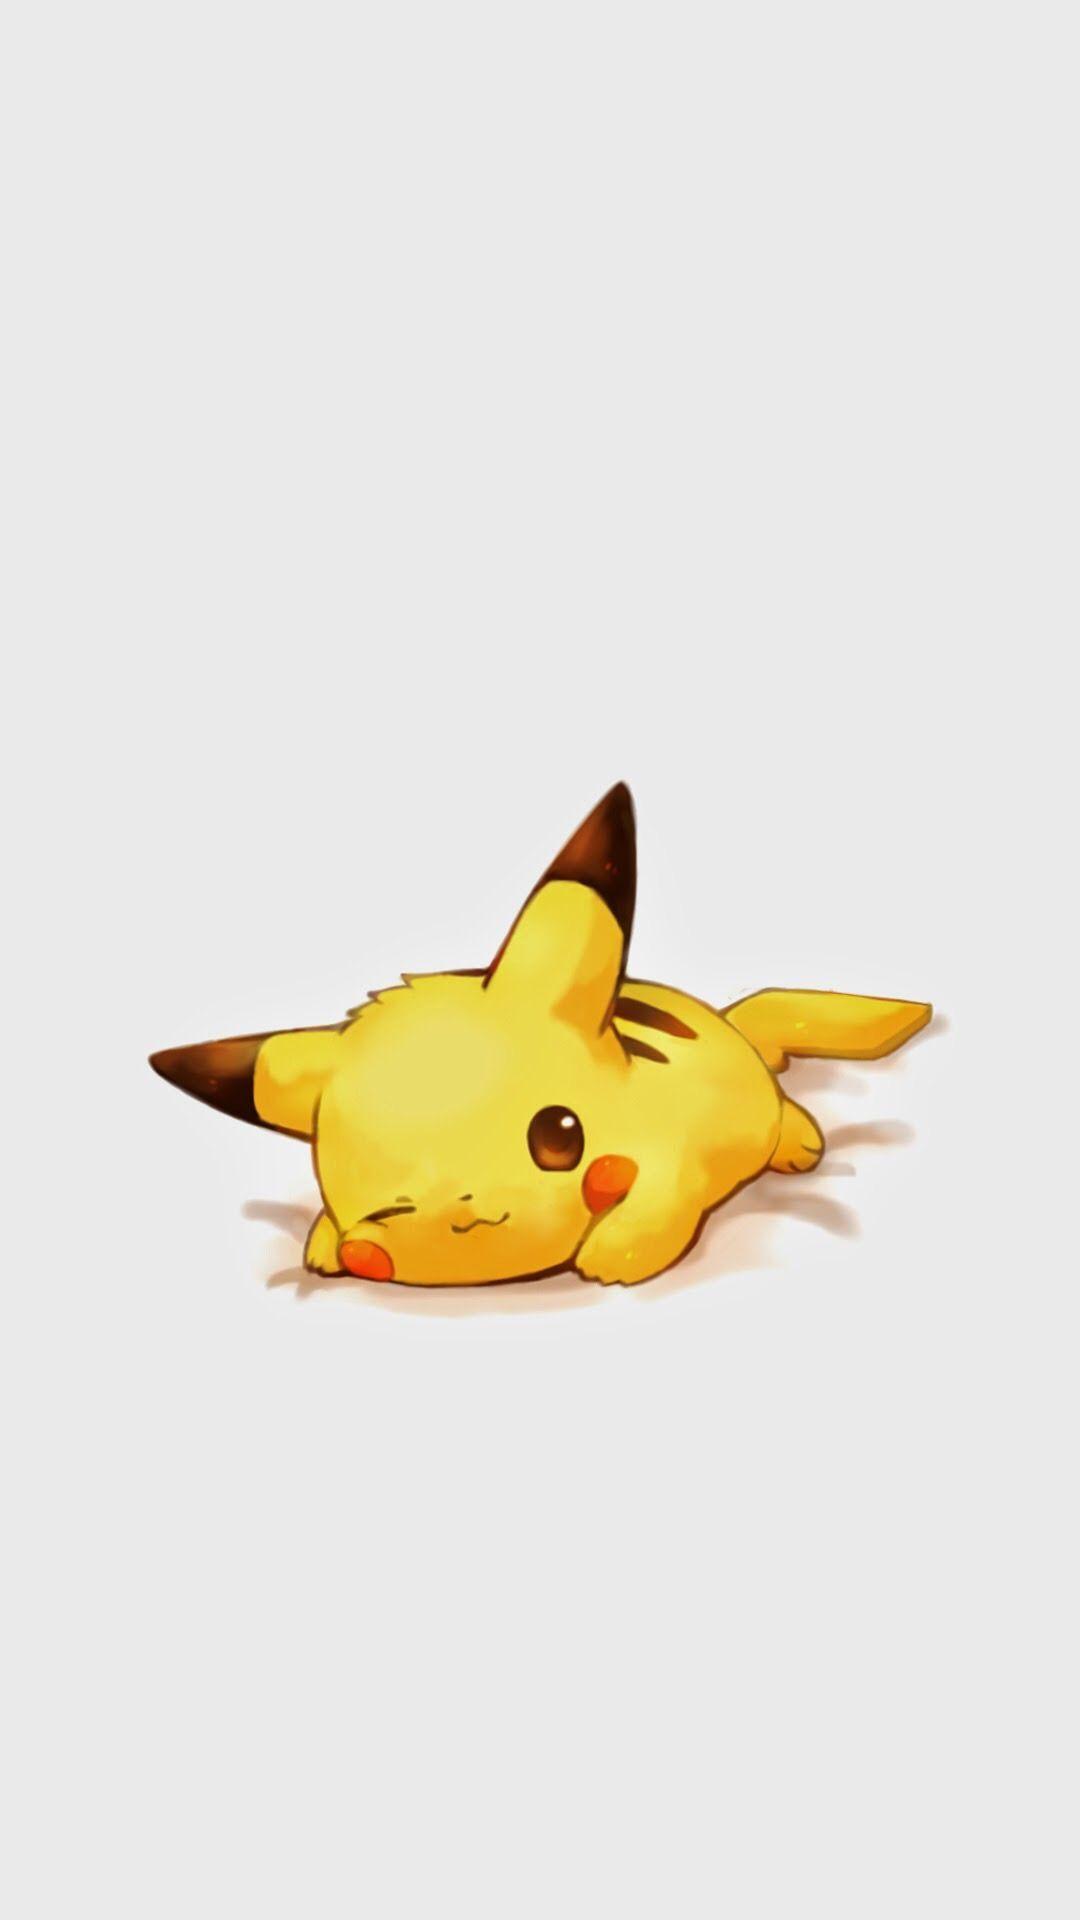 Great 9 Pikachu Wallpaper For Your Android or iPhone Wallpaper